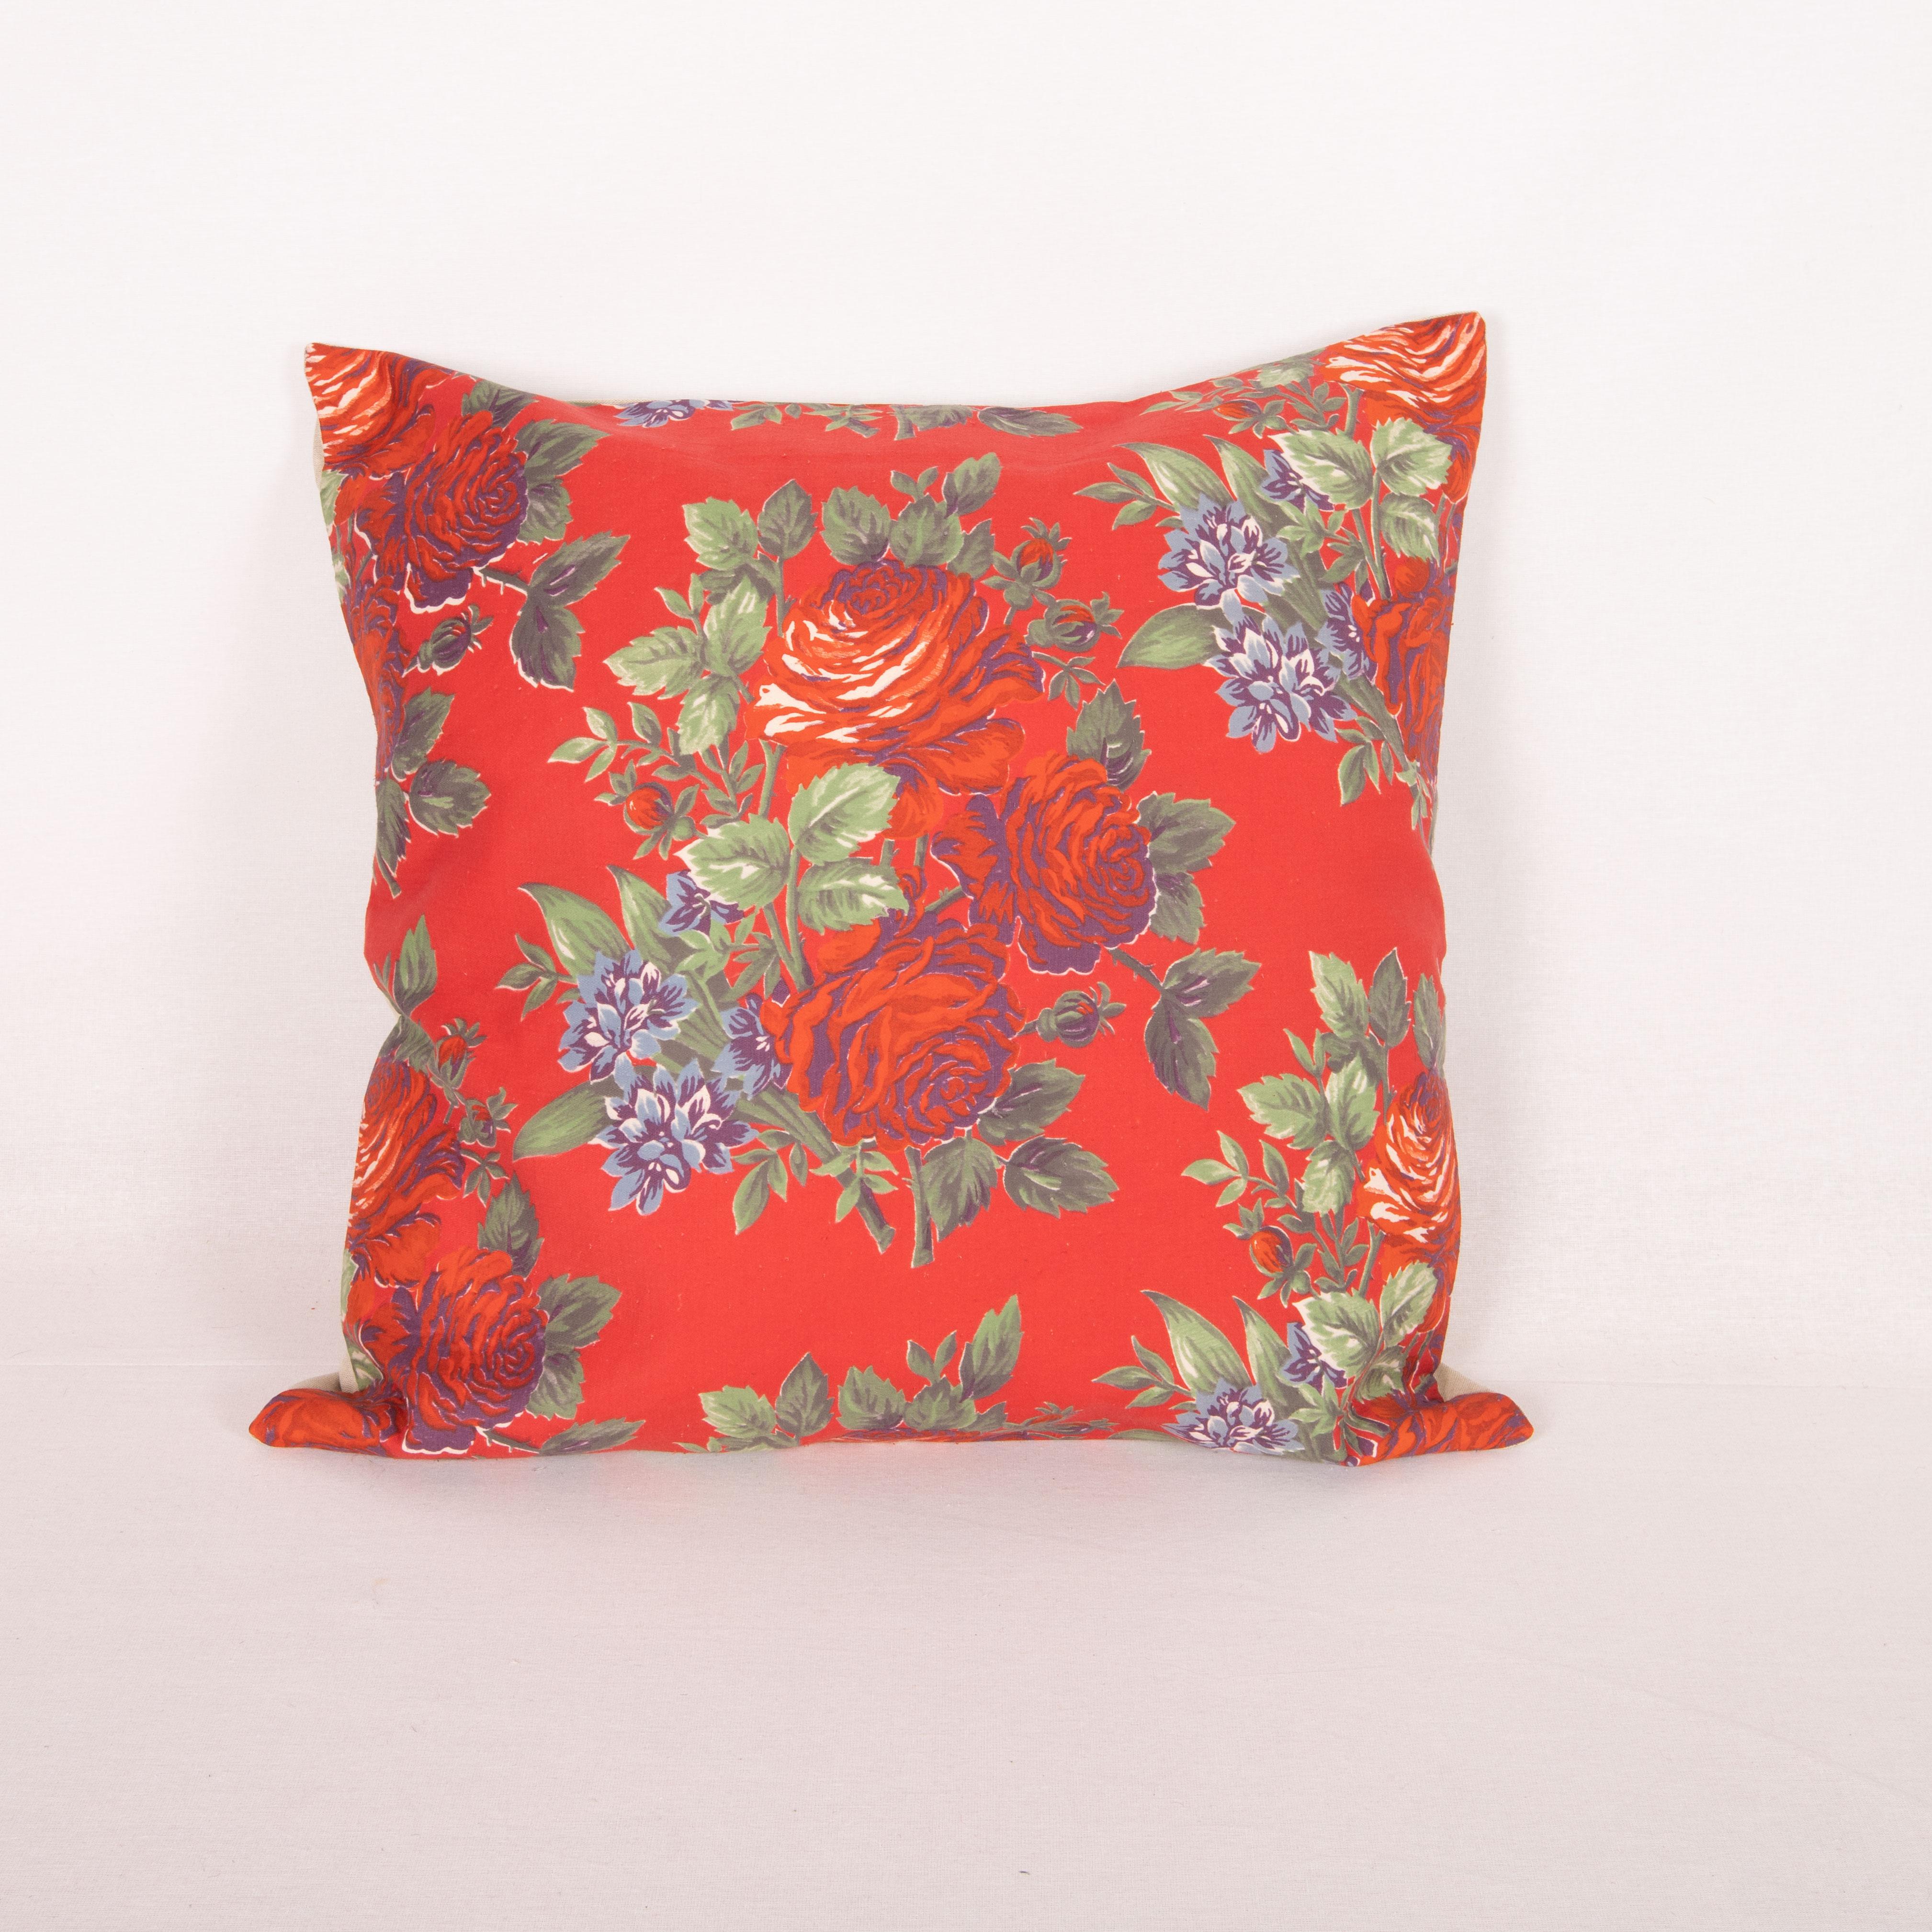 20th Century Russian Roller Printed Pillow Covers, Mid 20th C. For Sale